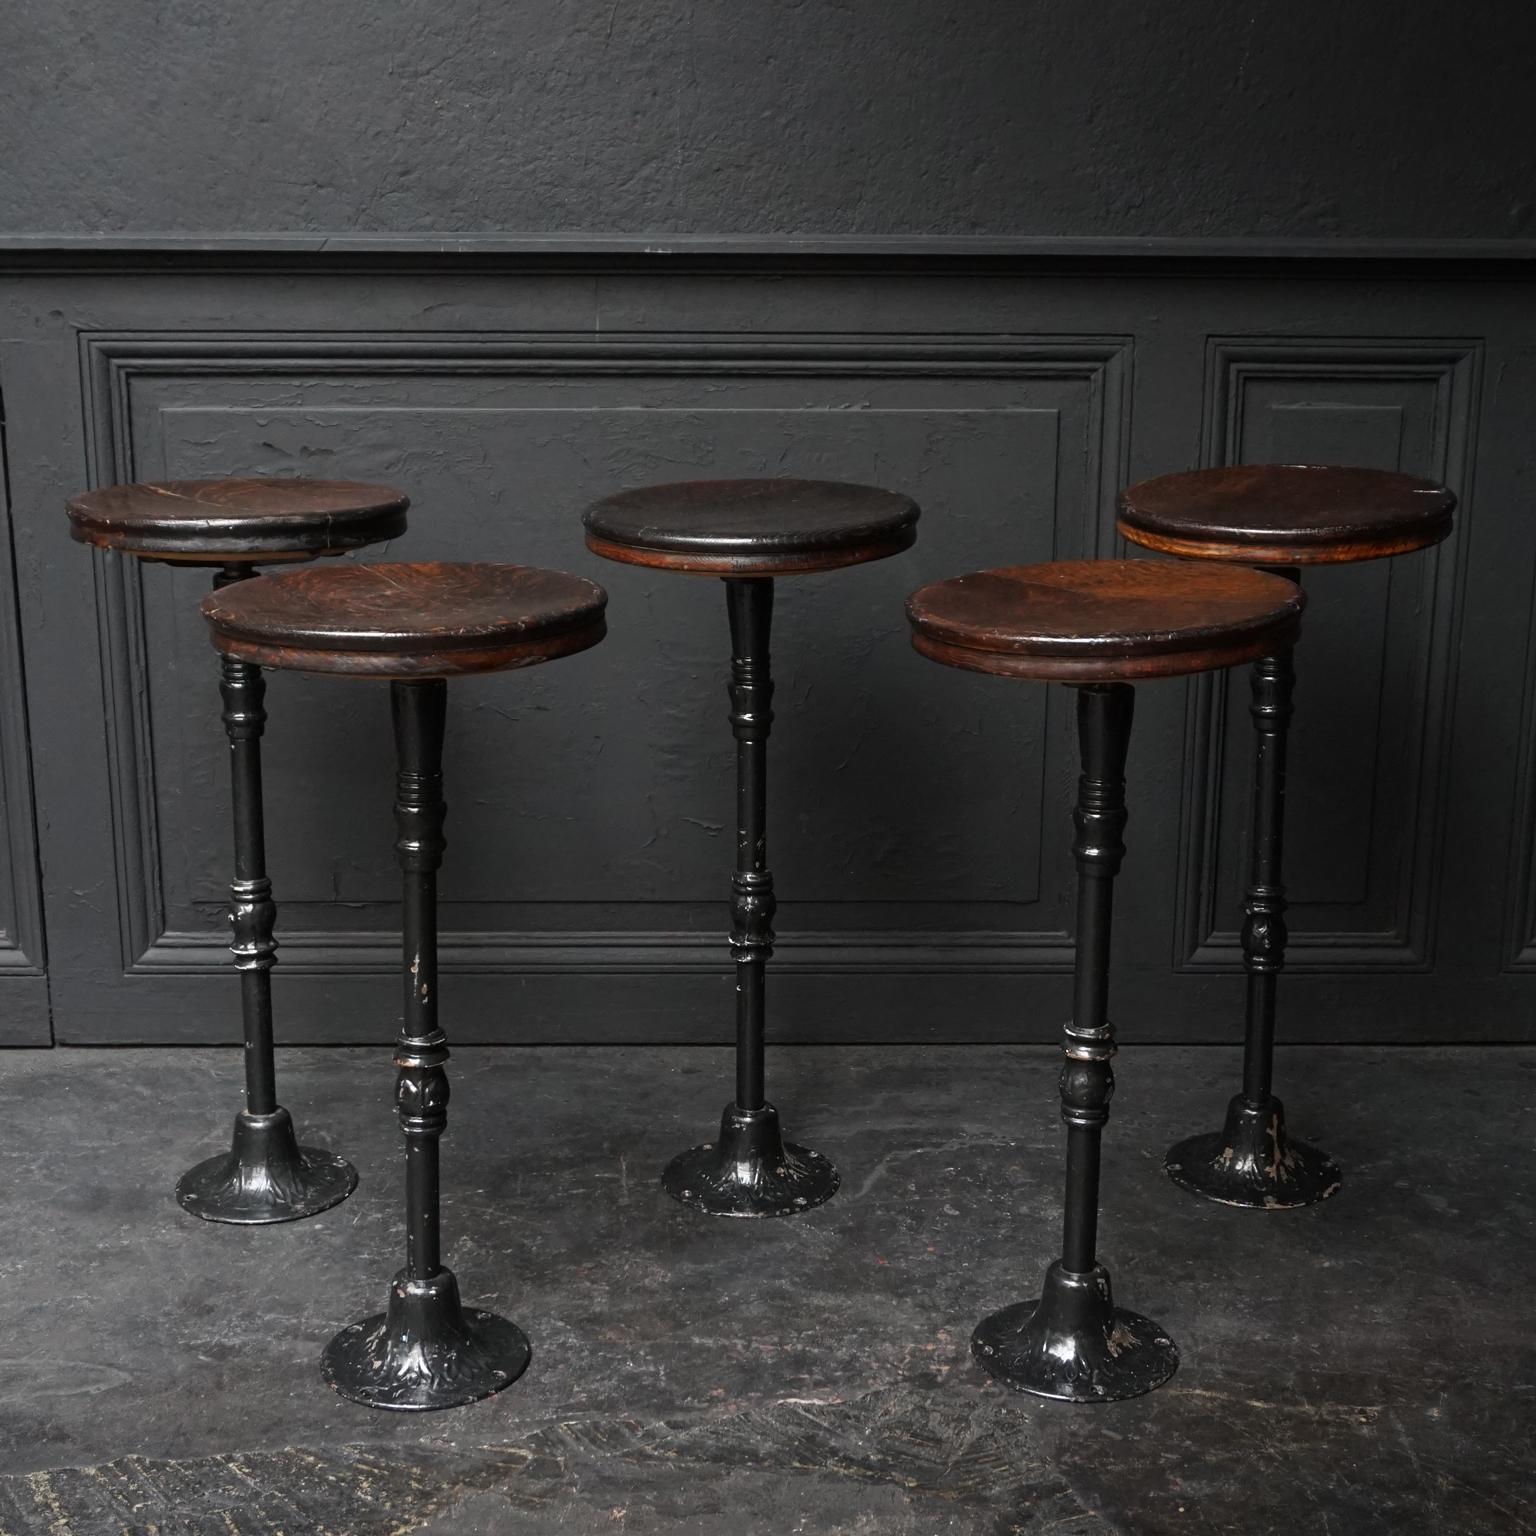 Set of five 1910 antique heavy industrial elevator cab or car operator's revolving stools with original oakwood seat and cast iron base.

All five are a little bit different in height varying from: 63cm (24.8 inch), 63.5cm (25 inch), 64cm (25.2